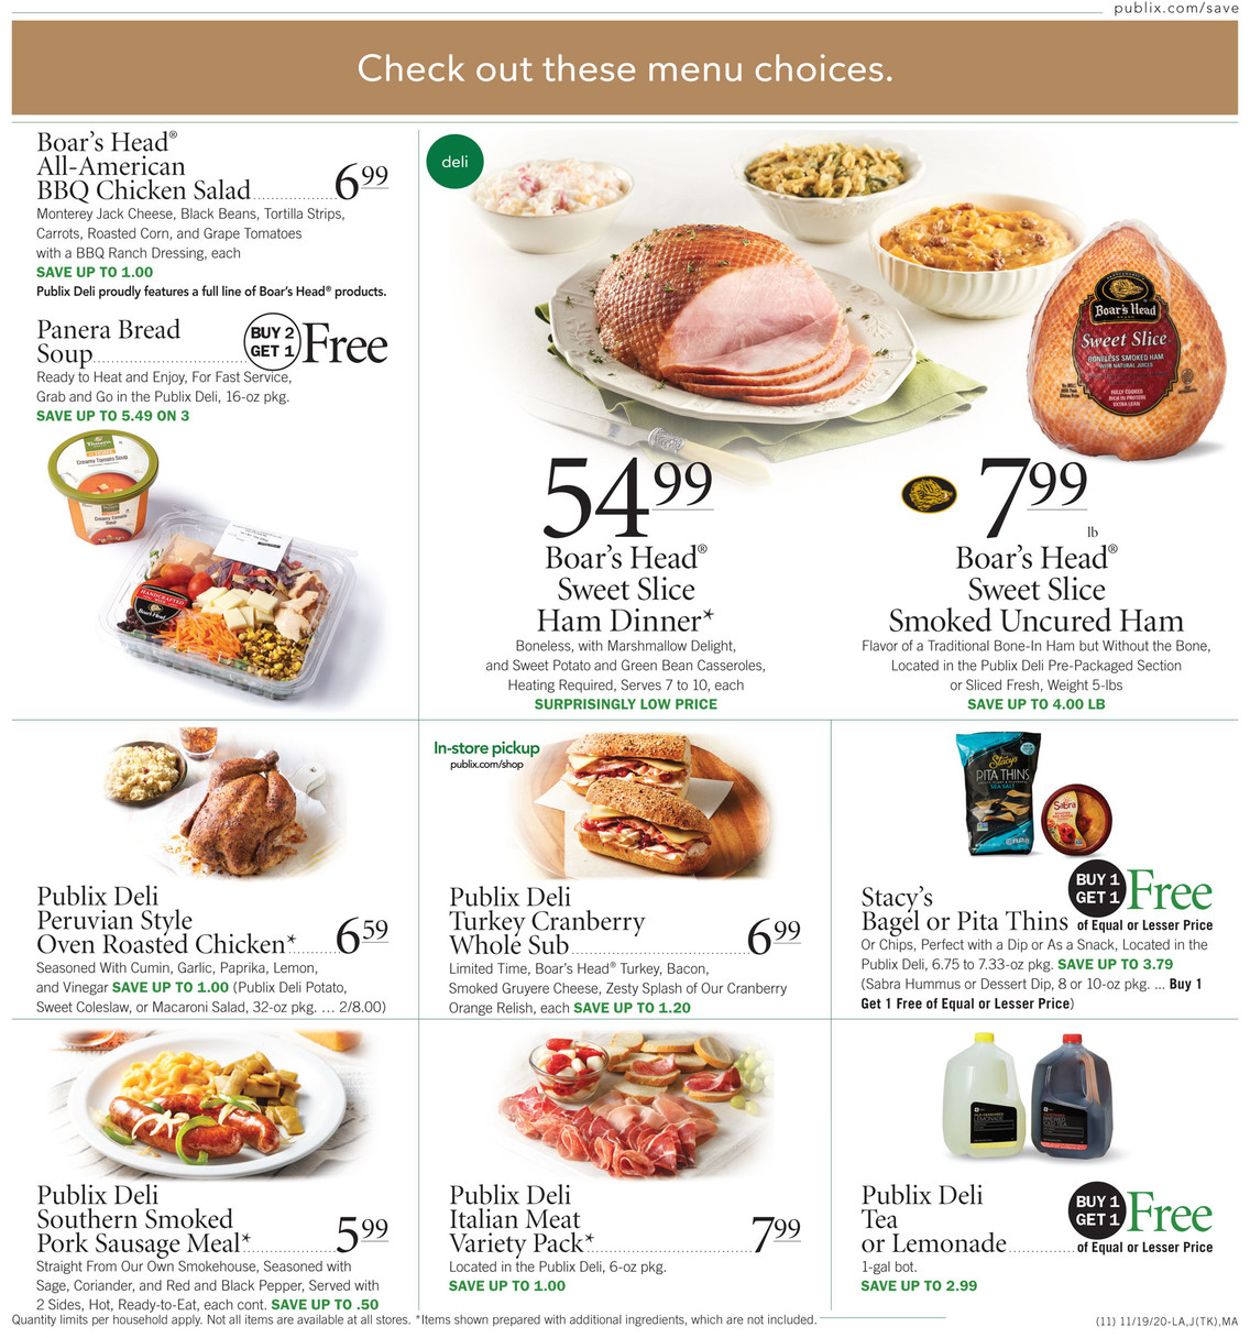 Christmas Dinner From Publix : Get Christmas Day Dinner To Go From ...